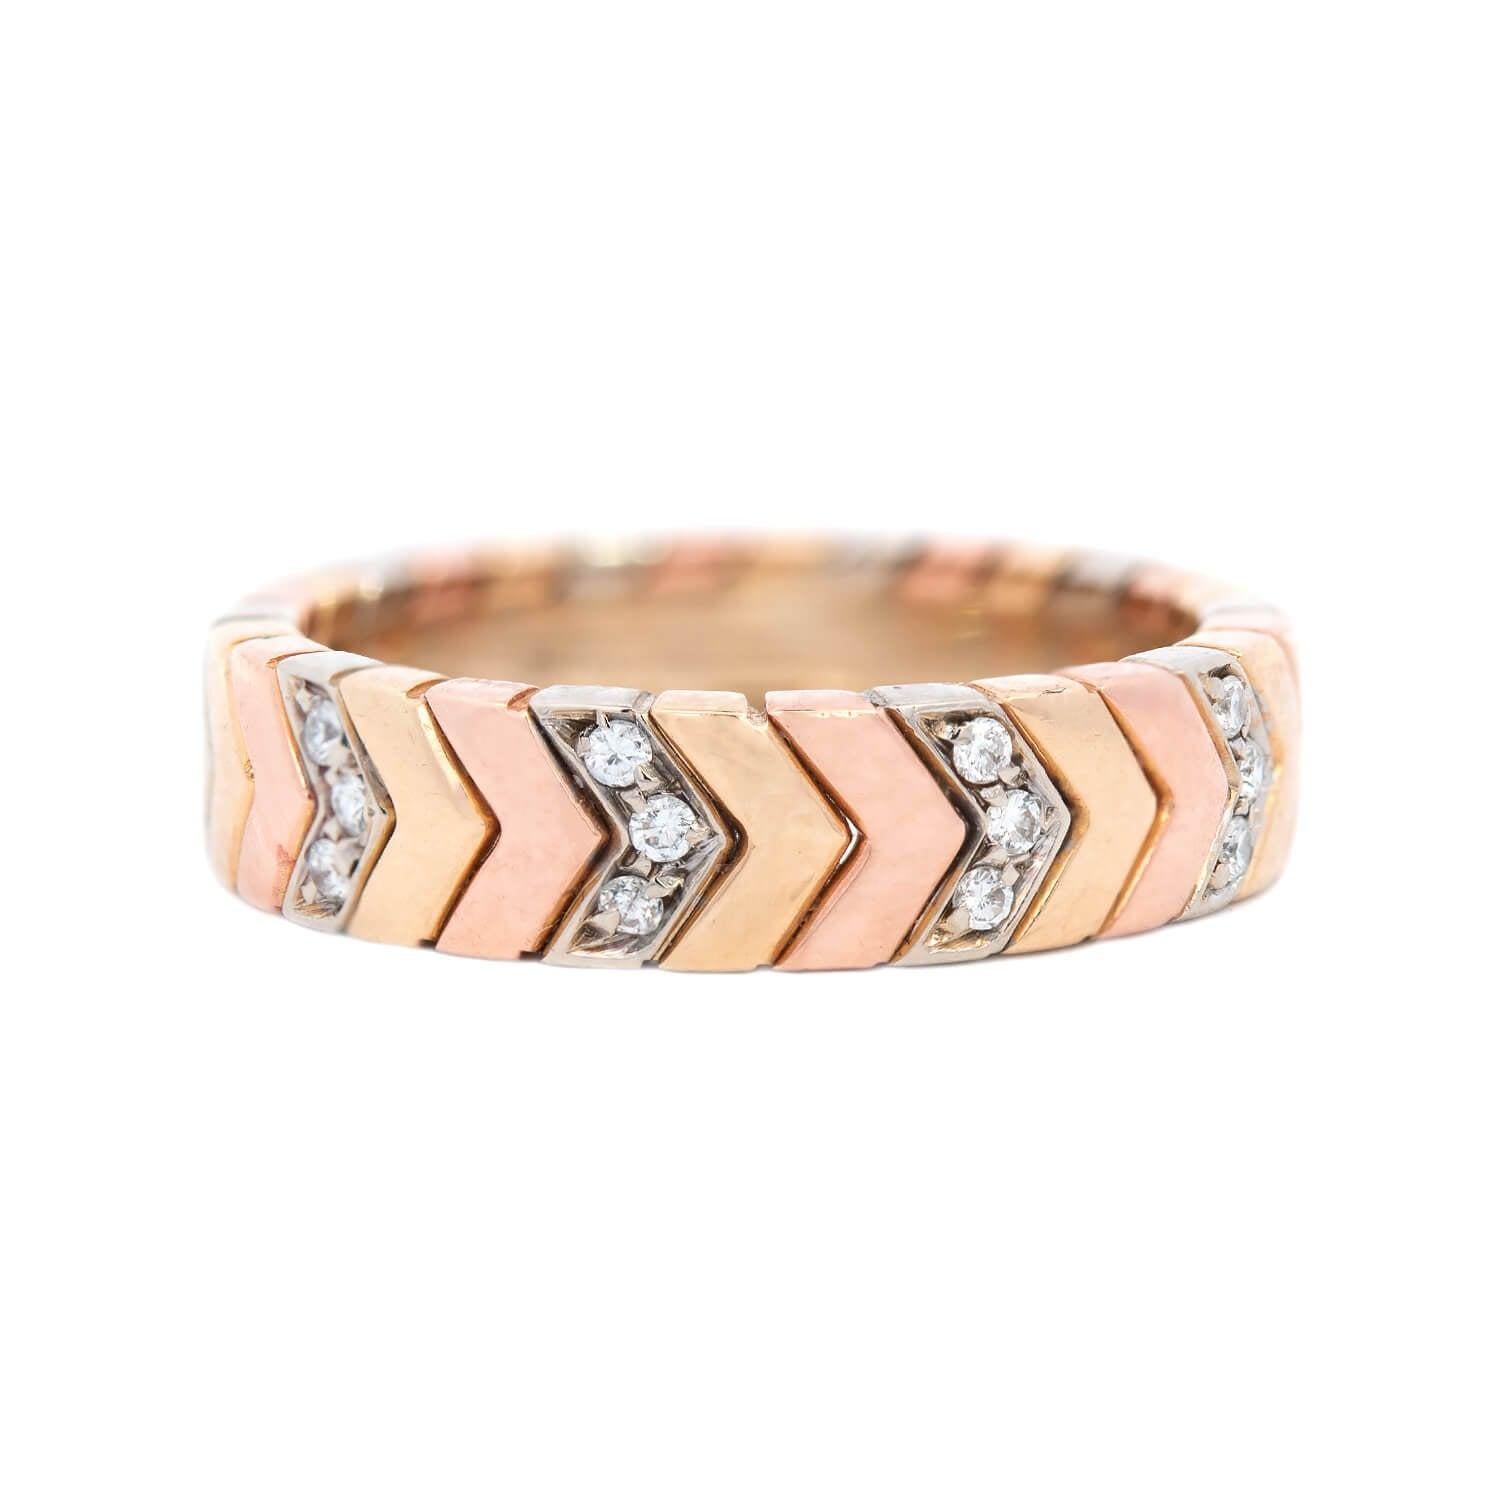 This fabulous estate ring is a signed piece by Cartier! Crafted in 18k mixed gold, the band is slightly wide and has an applied chevron motif in white, rose, and yellow gold. The mixed metals design carries around the entire ring, forming a seamless